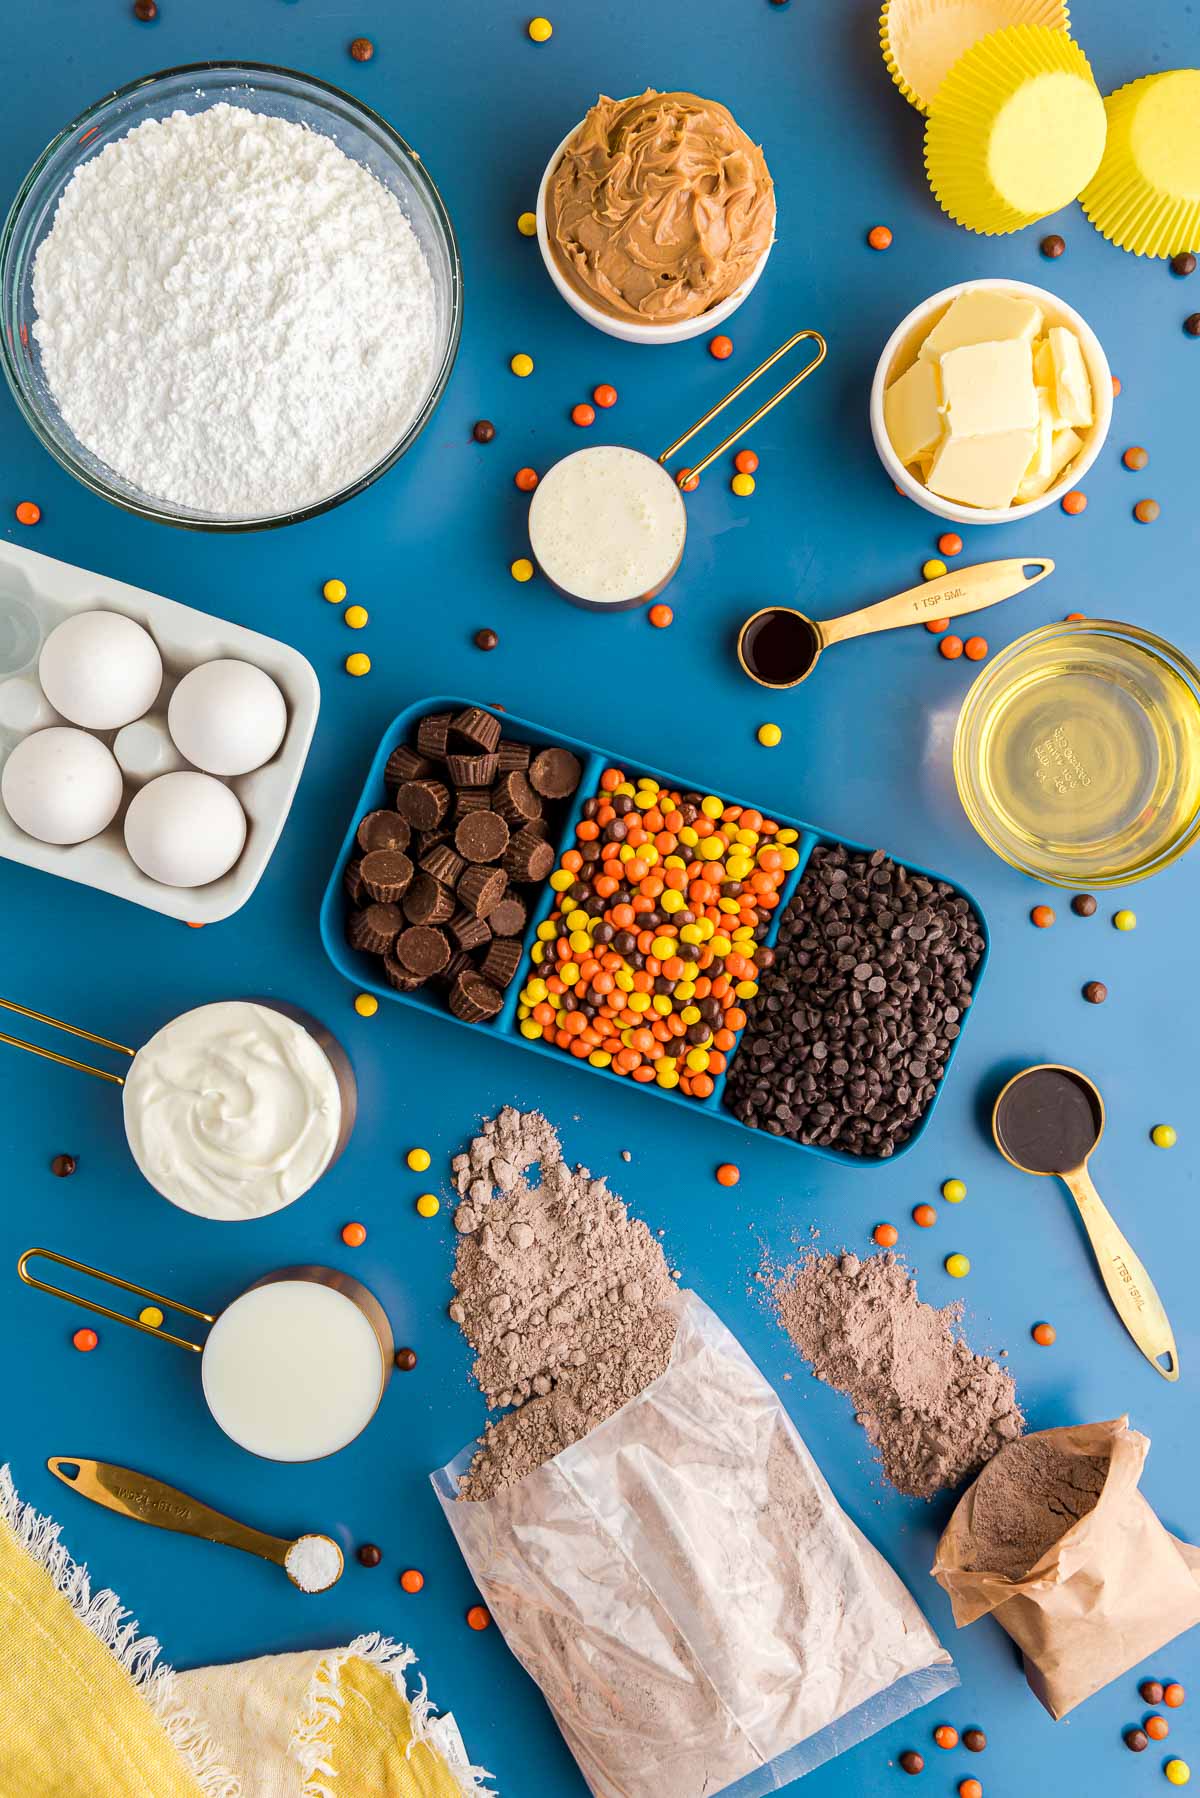 Overhead photo of ingredients prepped to make peanut butter chocolate cupcakes on a blue surface.